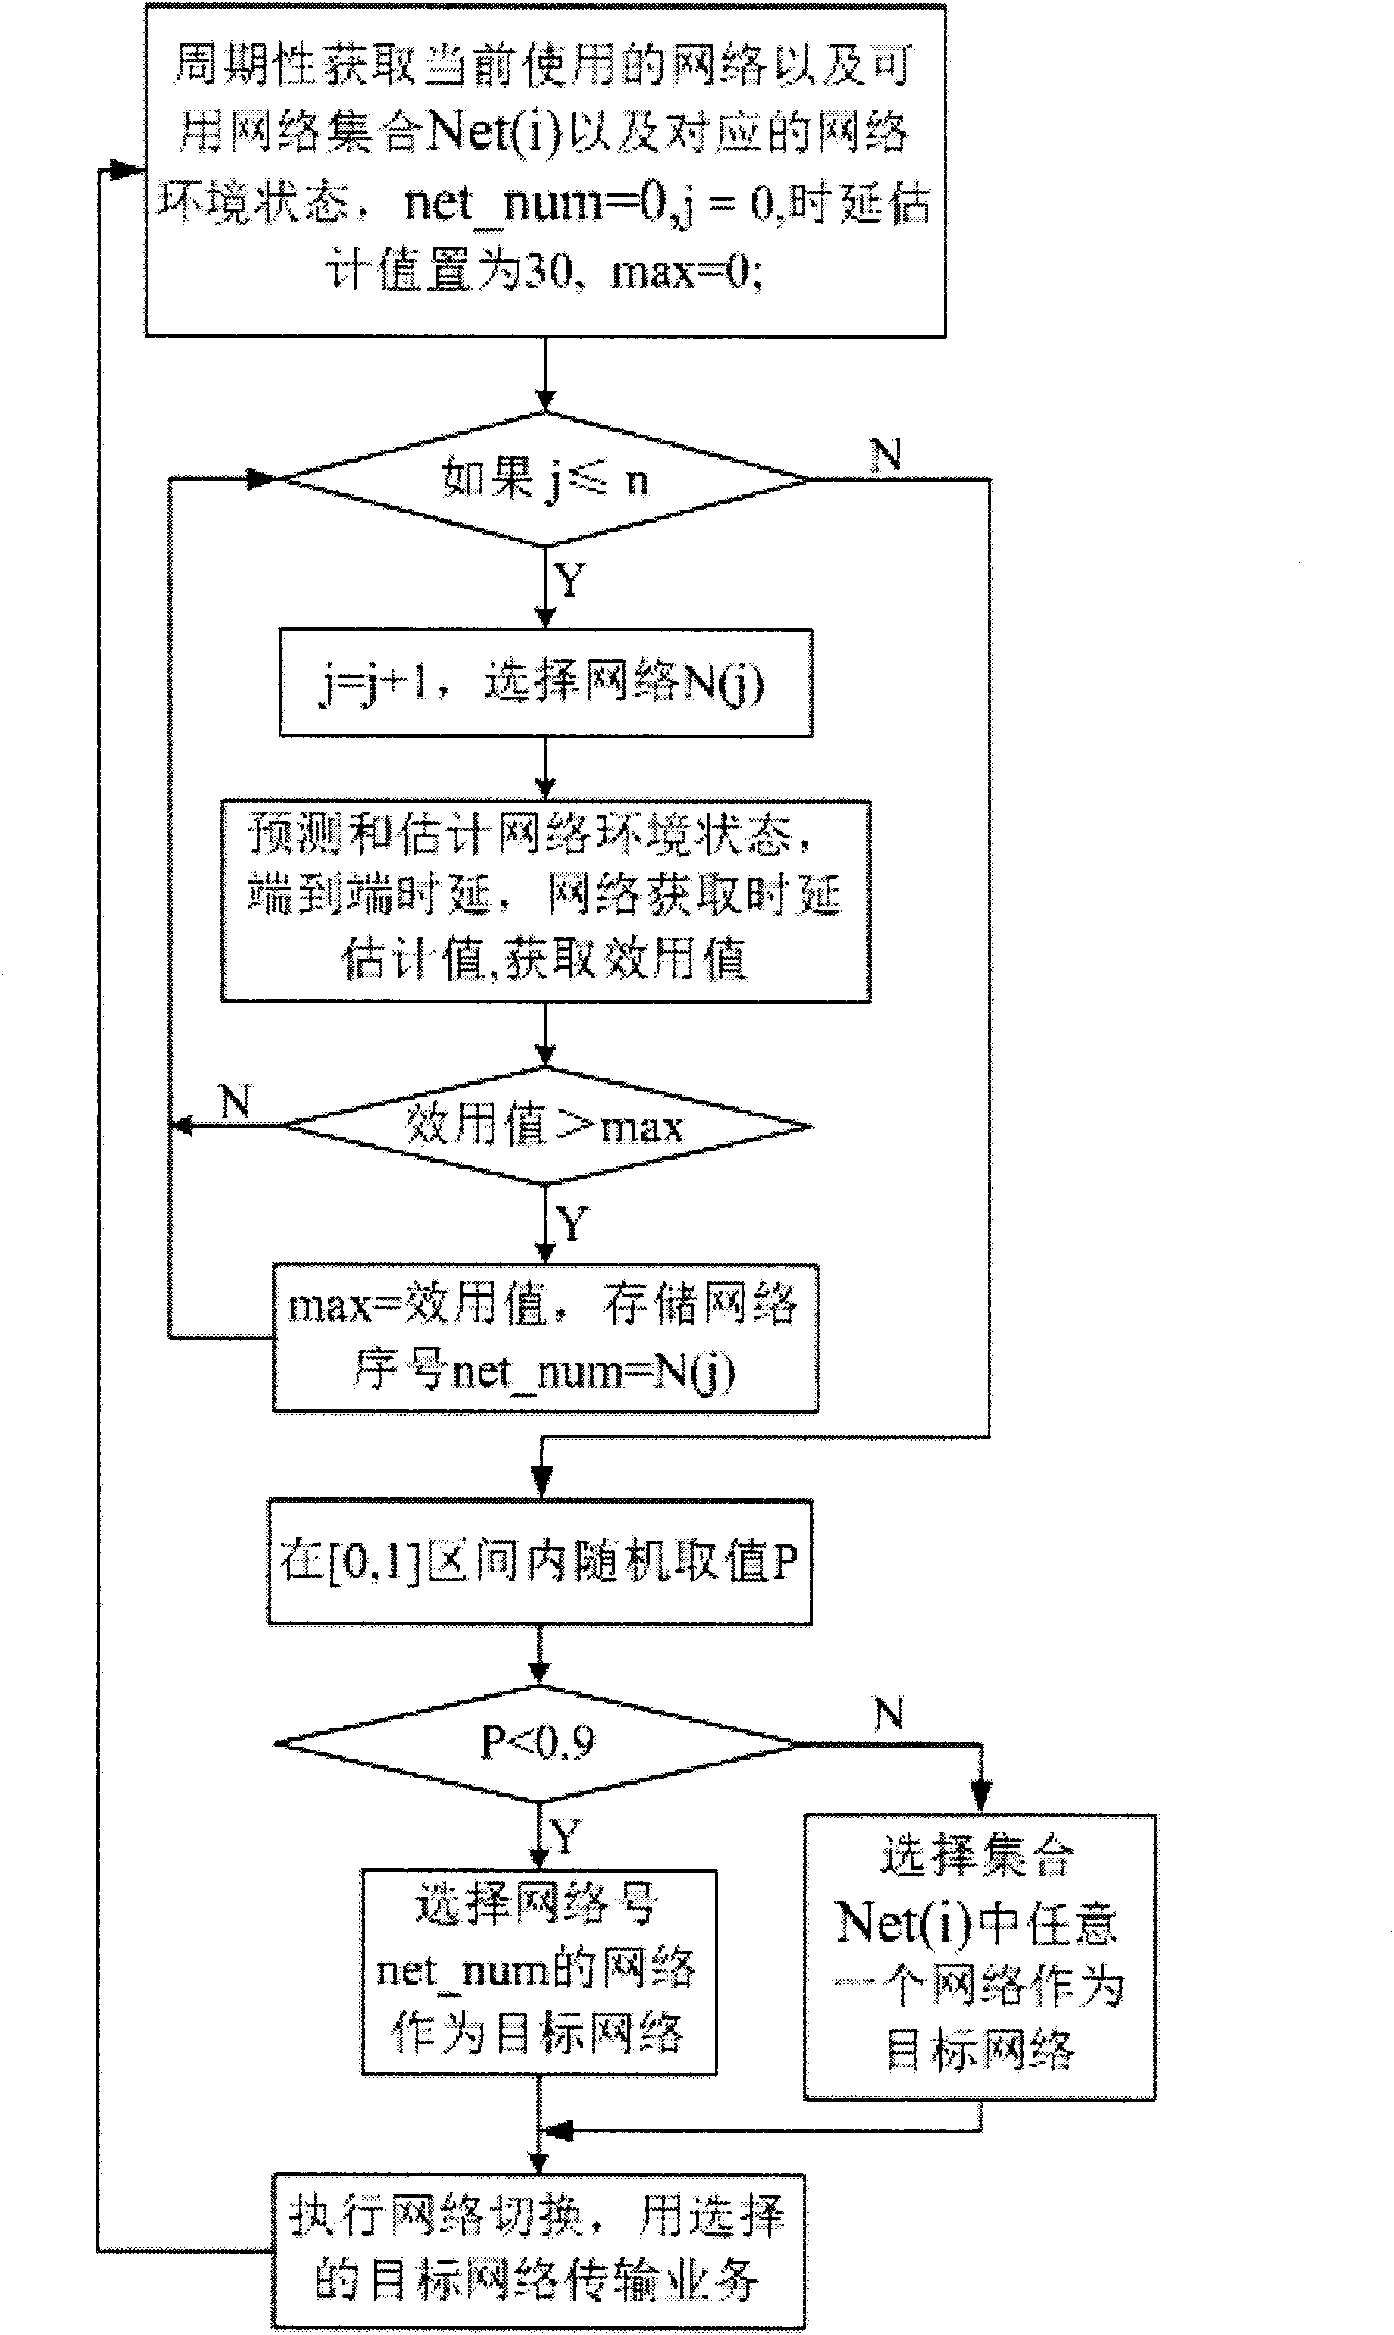 Routing method for heterogeneous network based on cognition